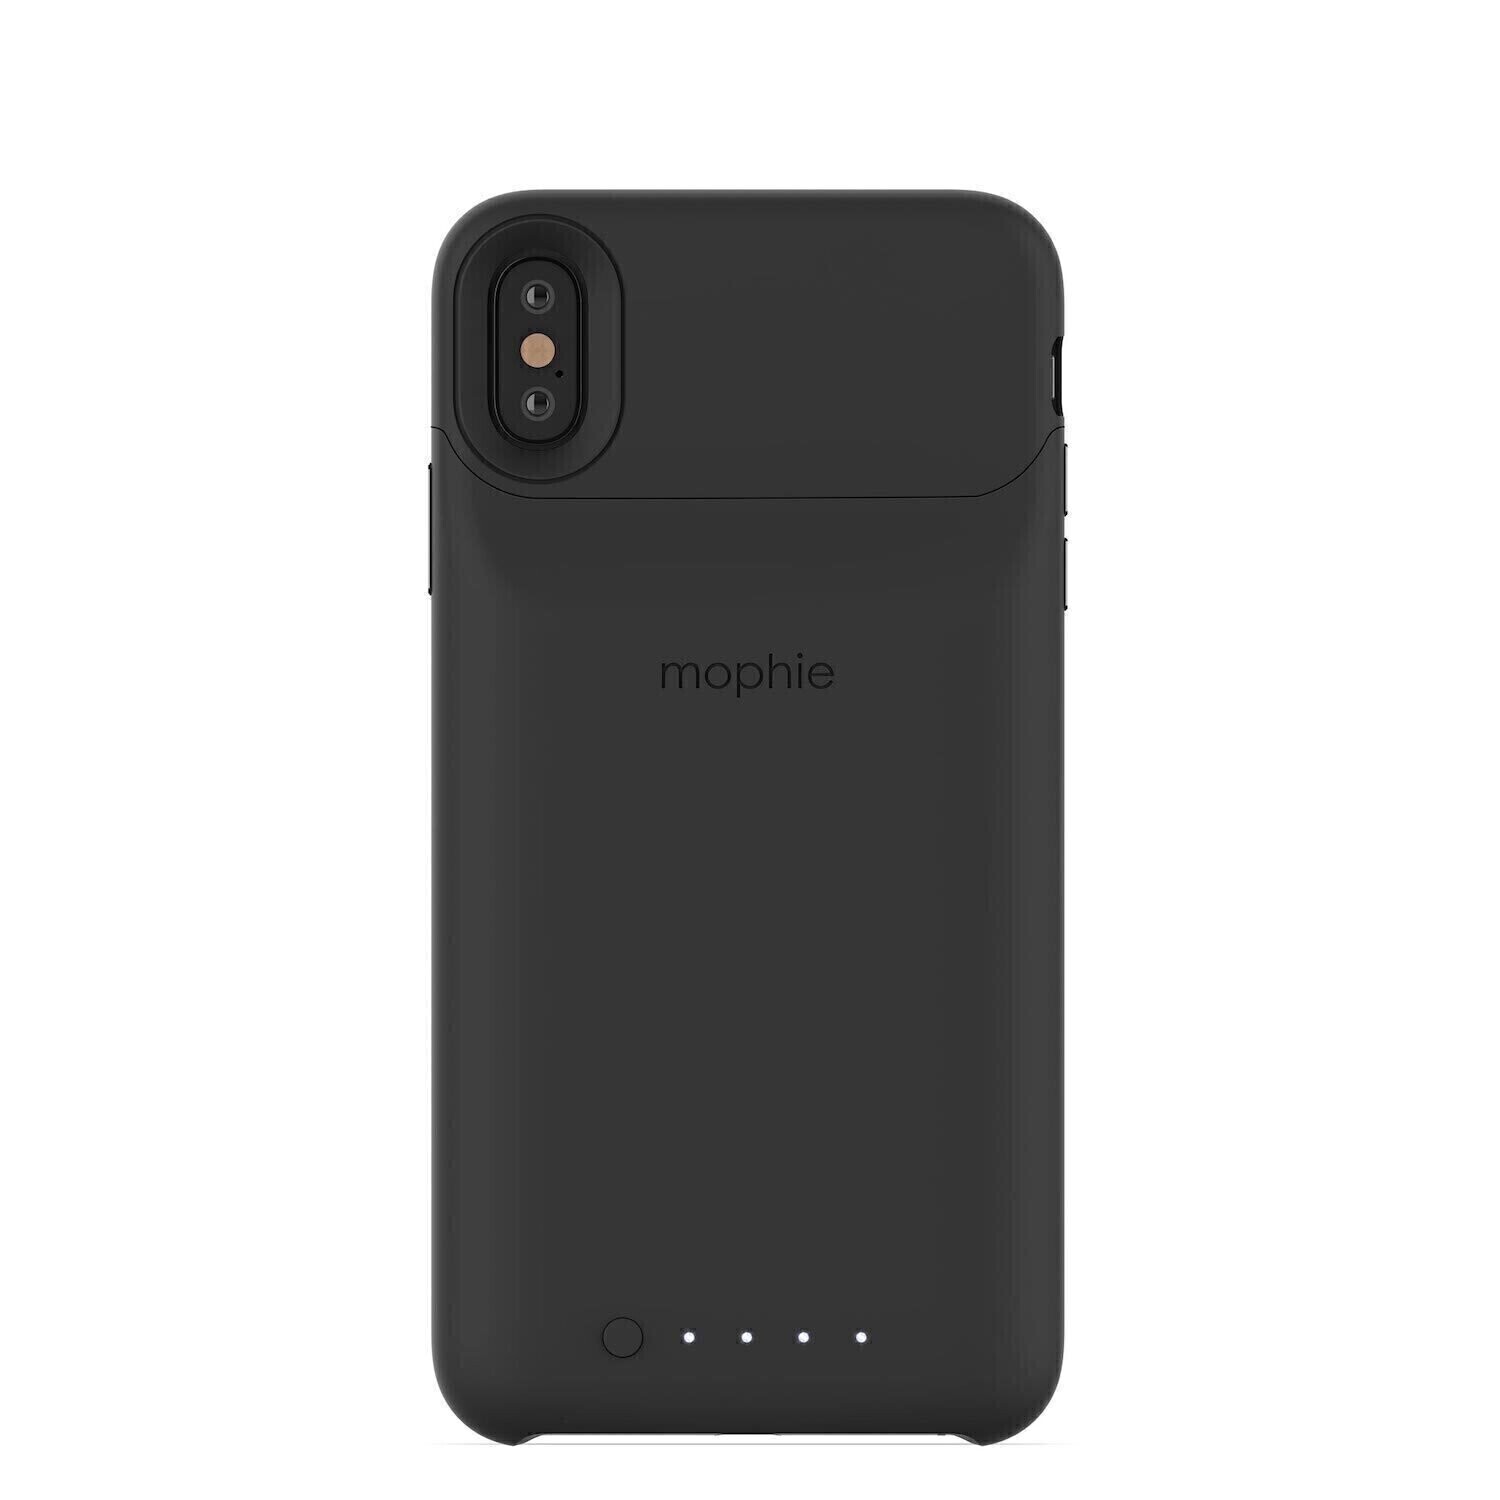 Mophie iPhone Xs Max Juice Pack Access Battery Case (2,200mAh), Black